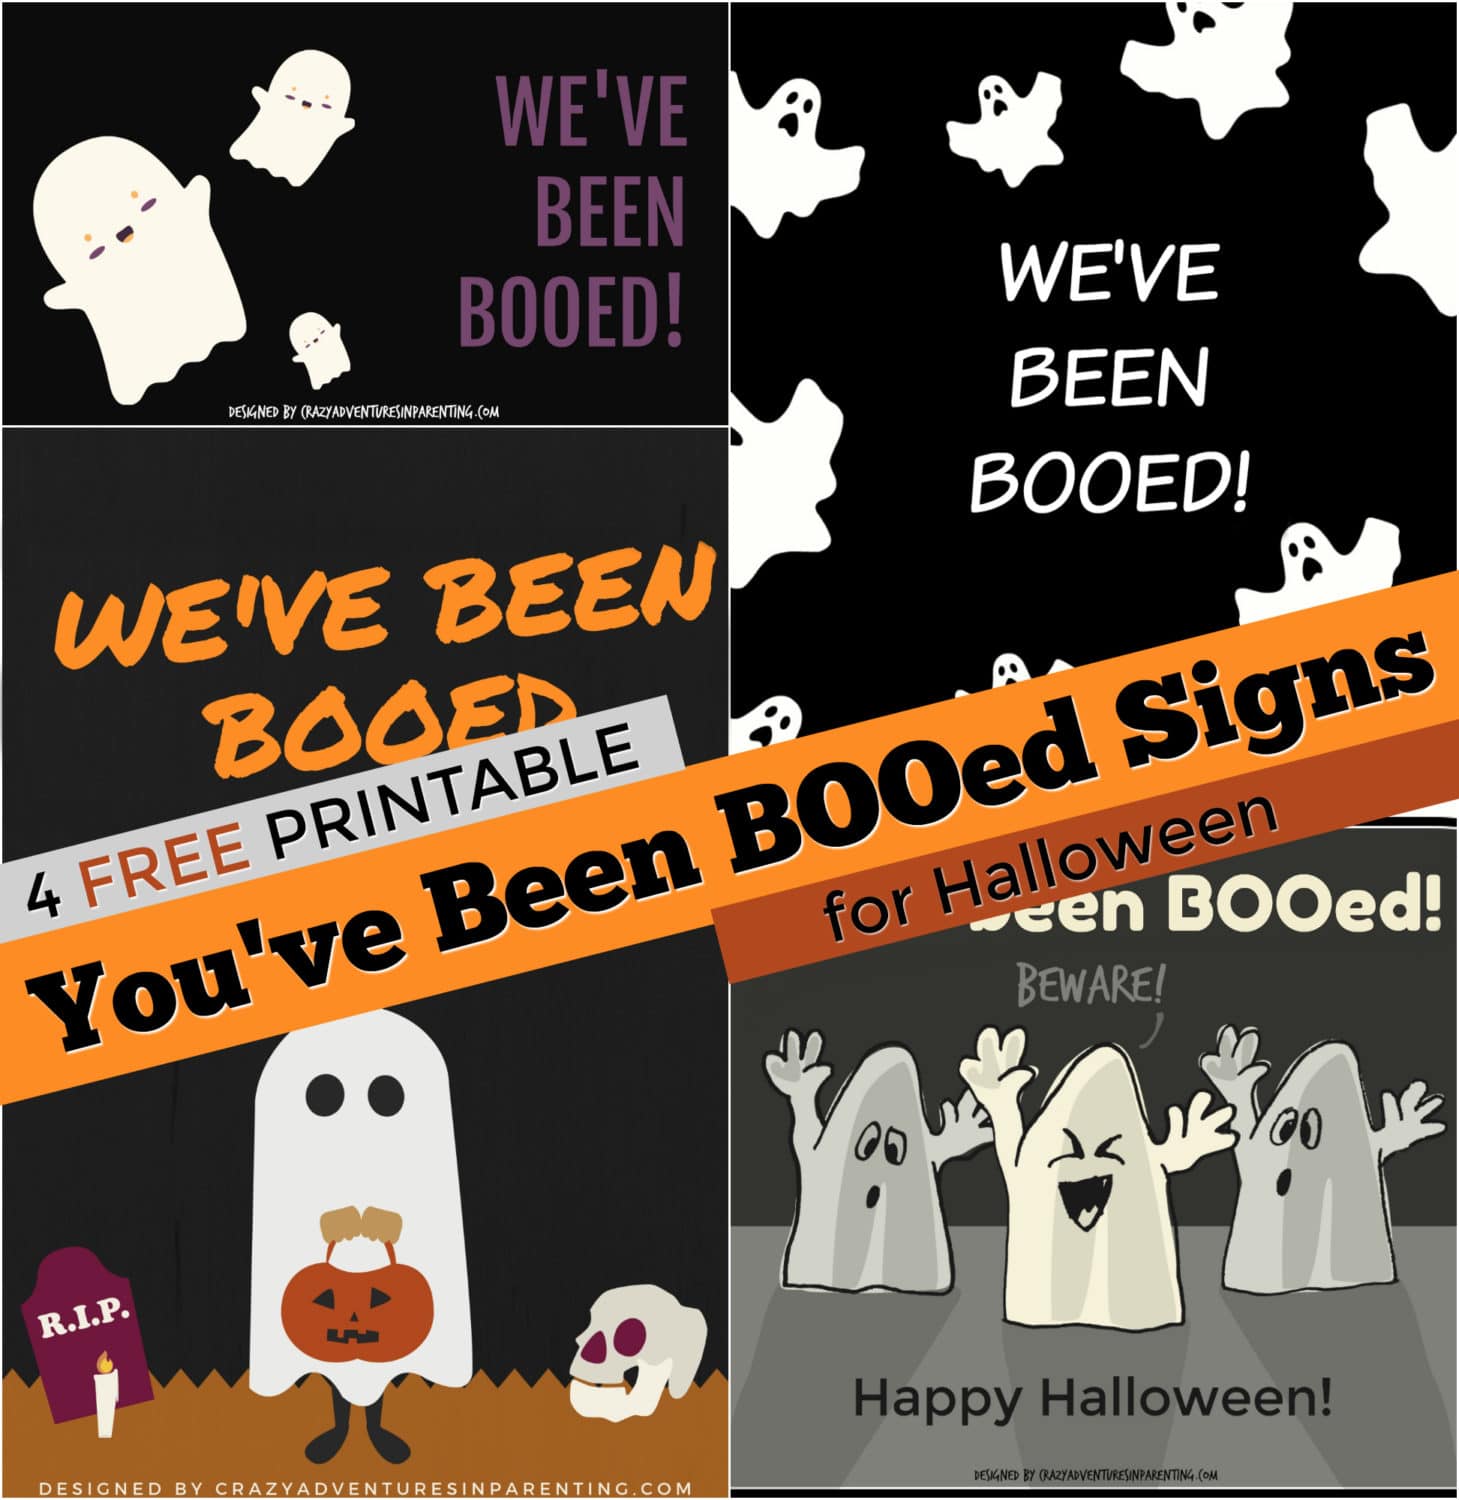 4 FREE Printable You've Been Booed Signs for Halloween